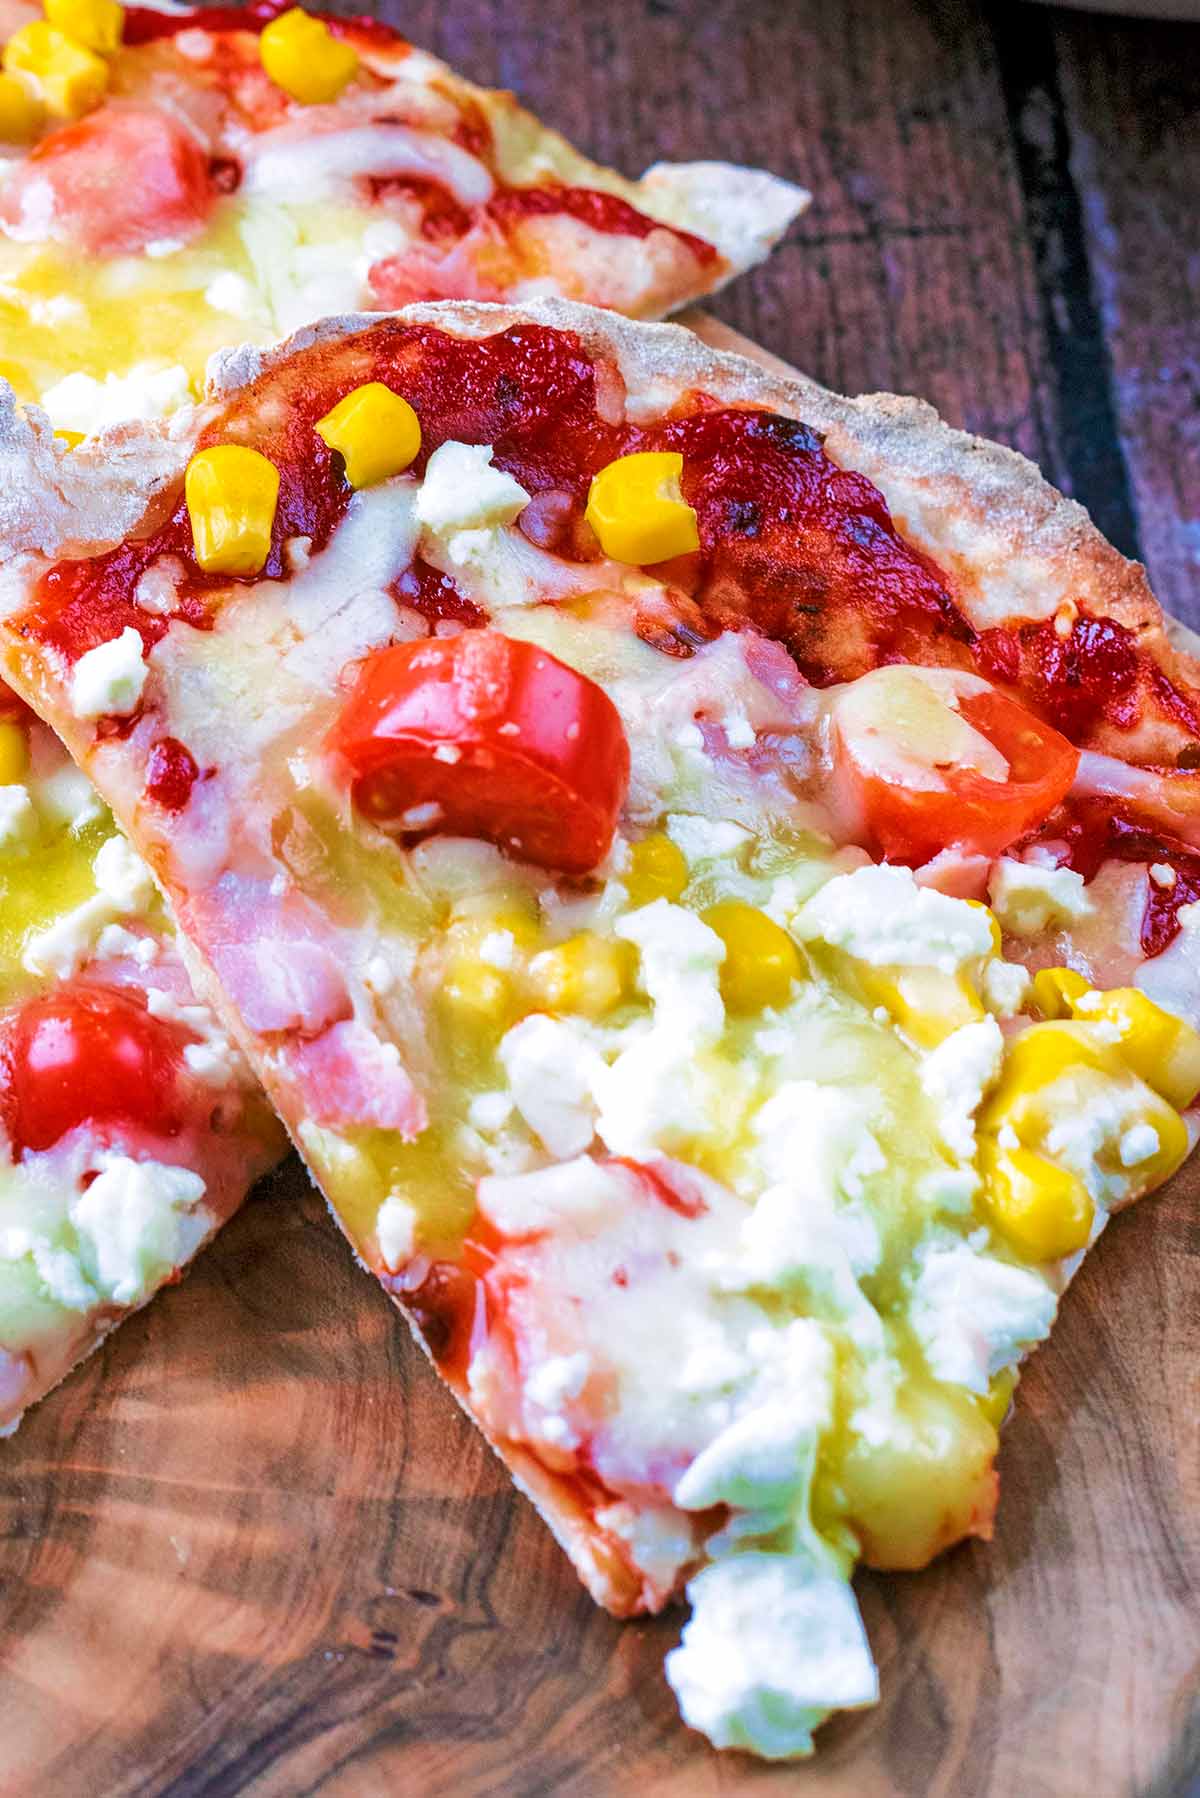 A slice of pizza topped with vegetables and cheese.